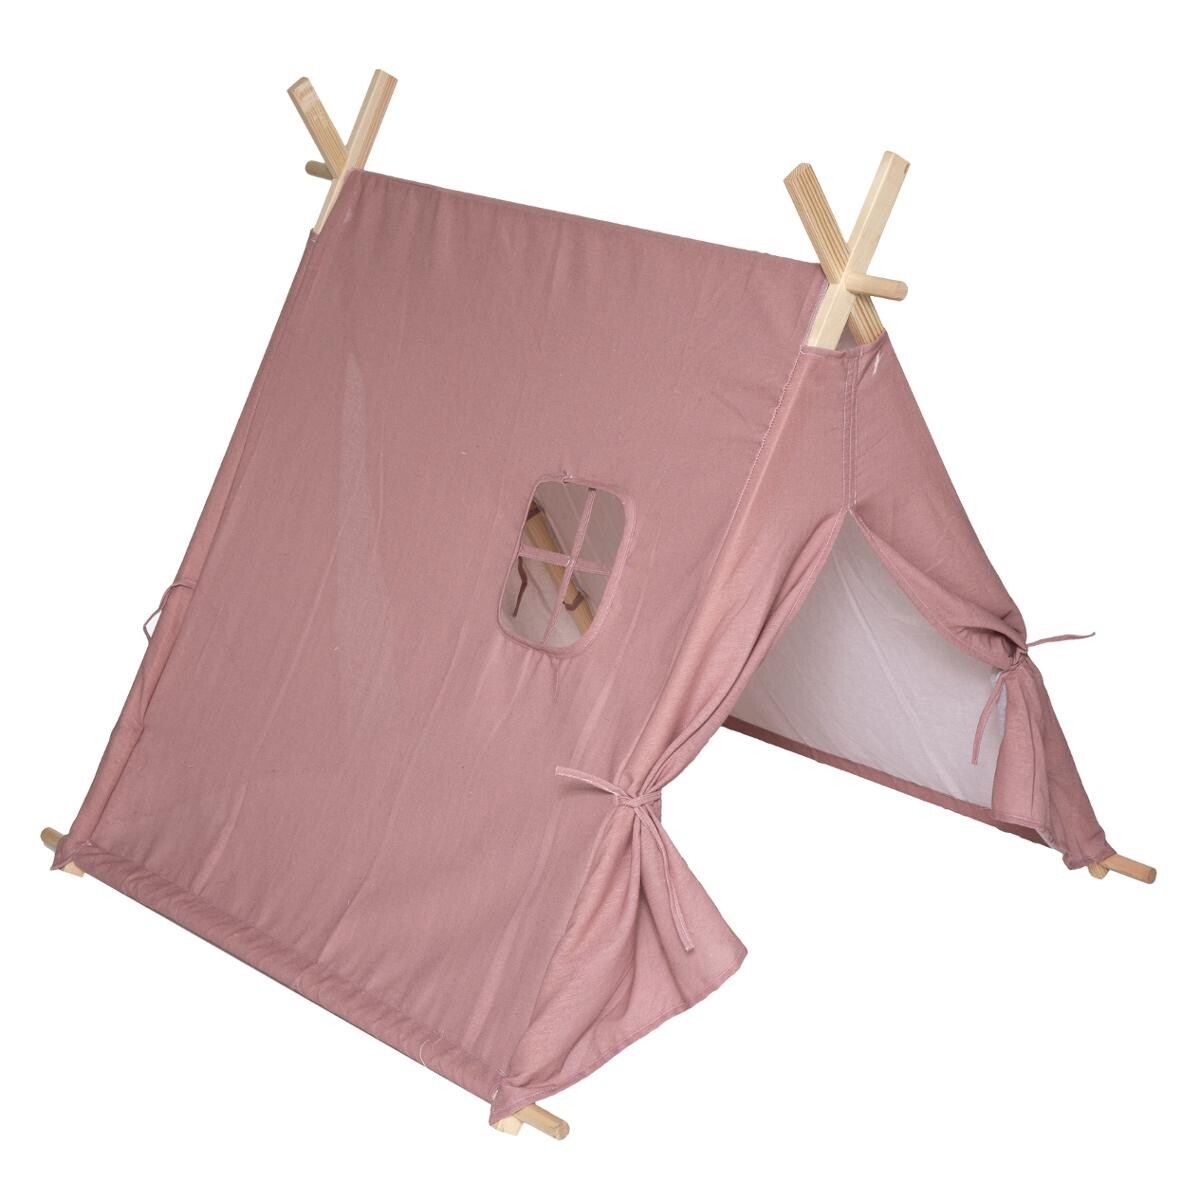 Play tent teepee tent for the children's room, pink 